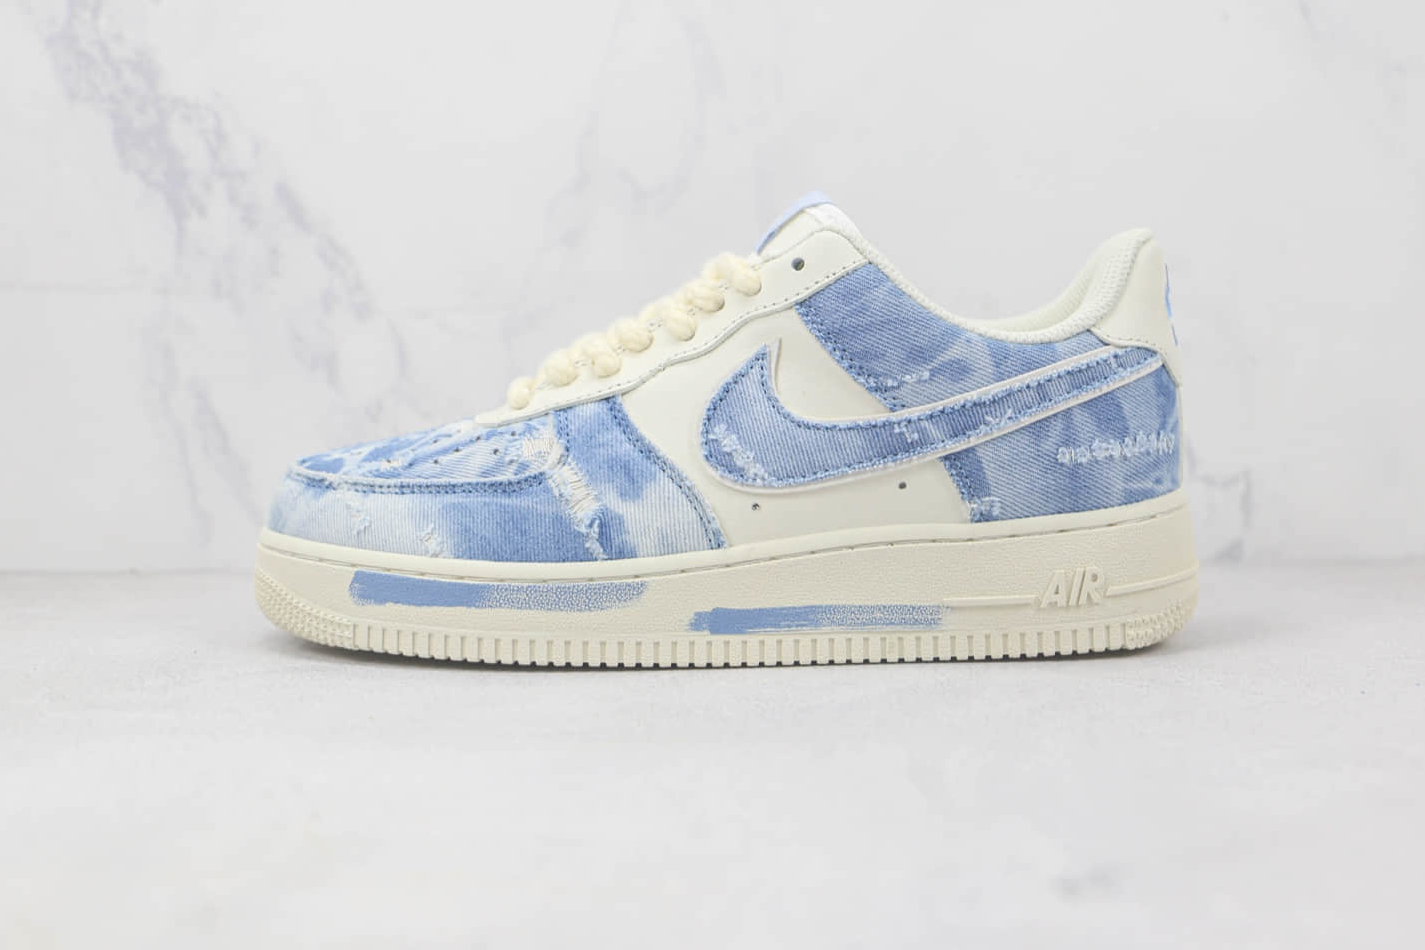 Nike Air Force 1 Low Denim Blue White Sail CW1888-611 - Stylish and Classic Sneakers